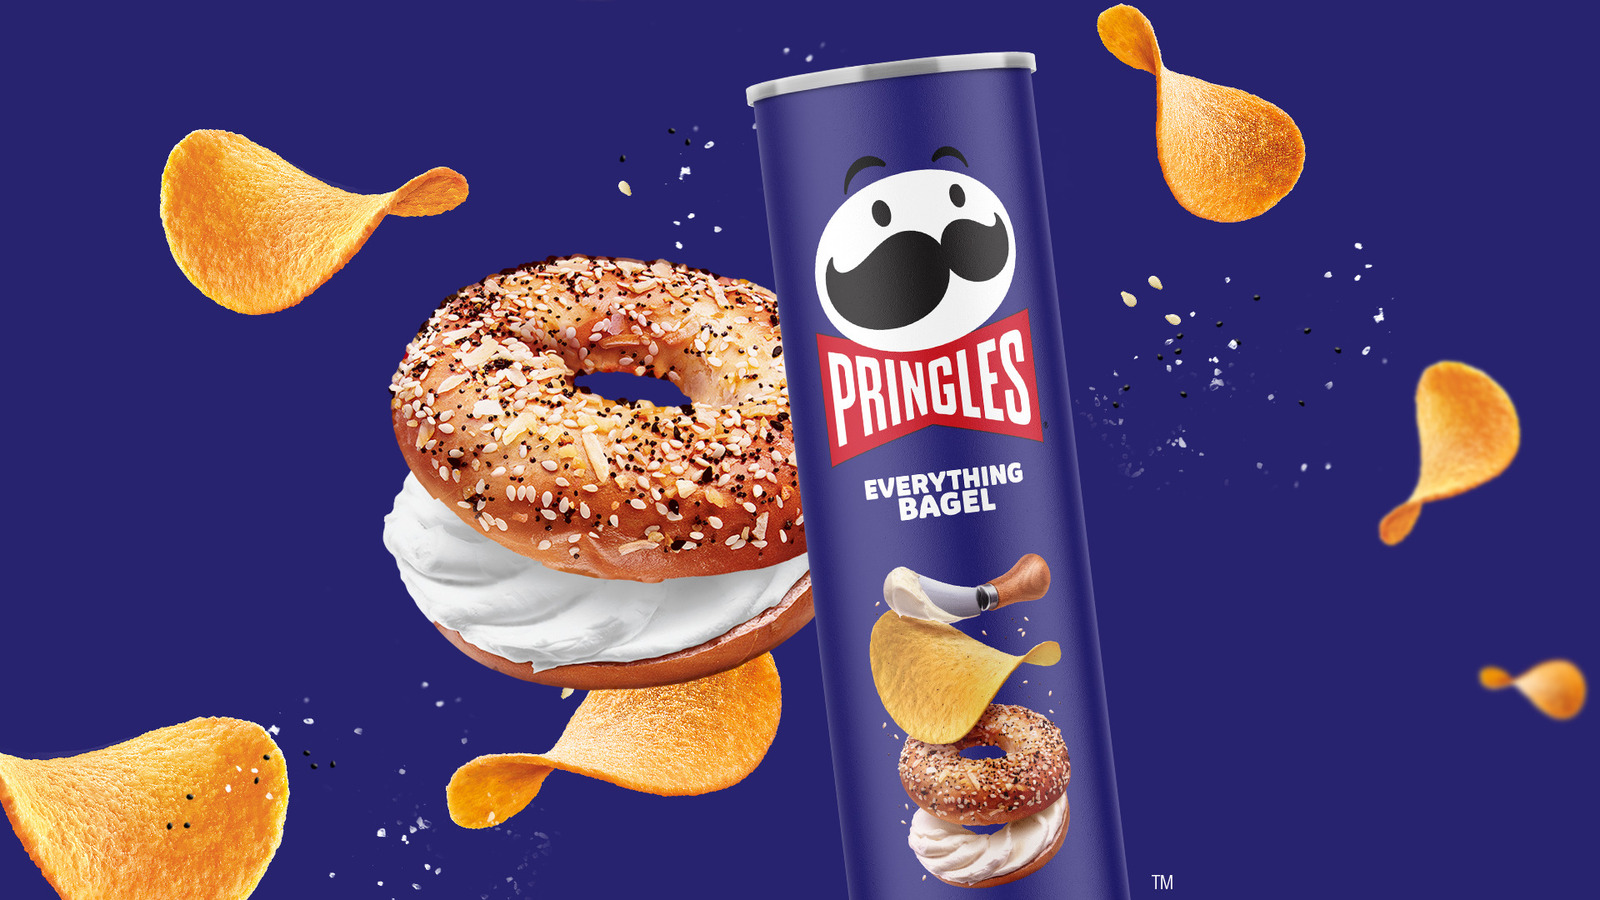 Pringles Joins The Everything Bagel Trend With Its Newest Crisp Flavor